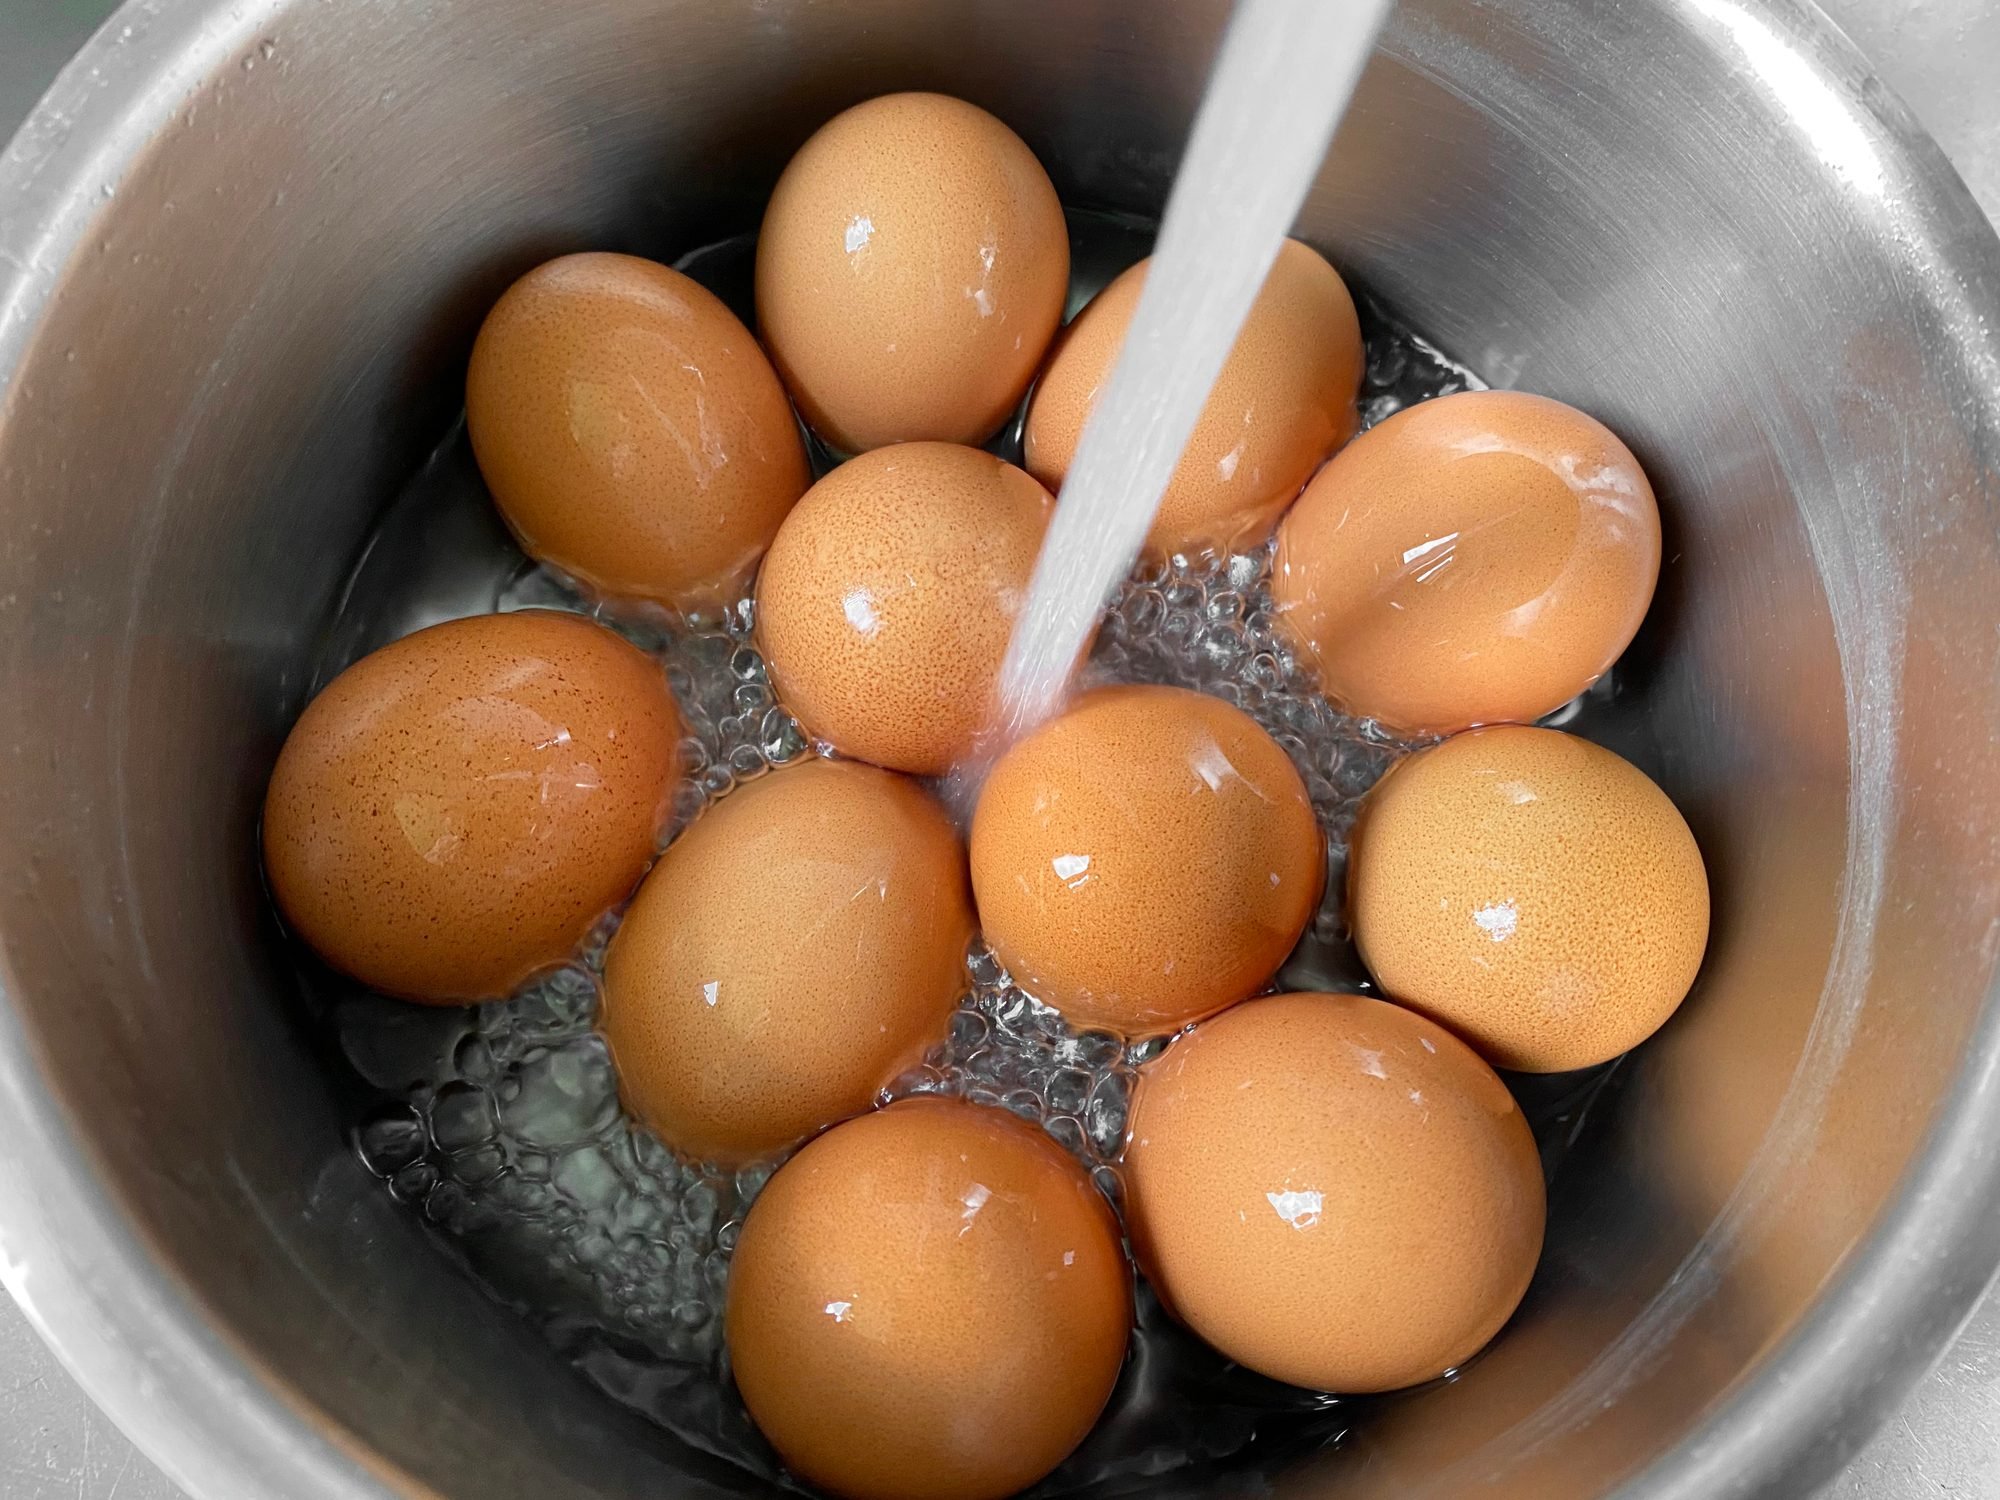 Cleaning your backyard eggs has never been so easy with the